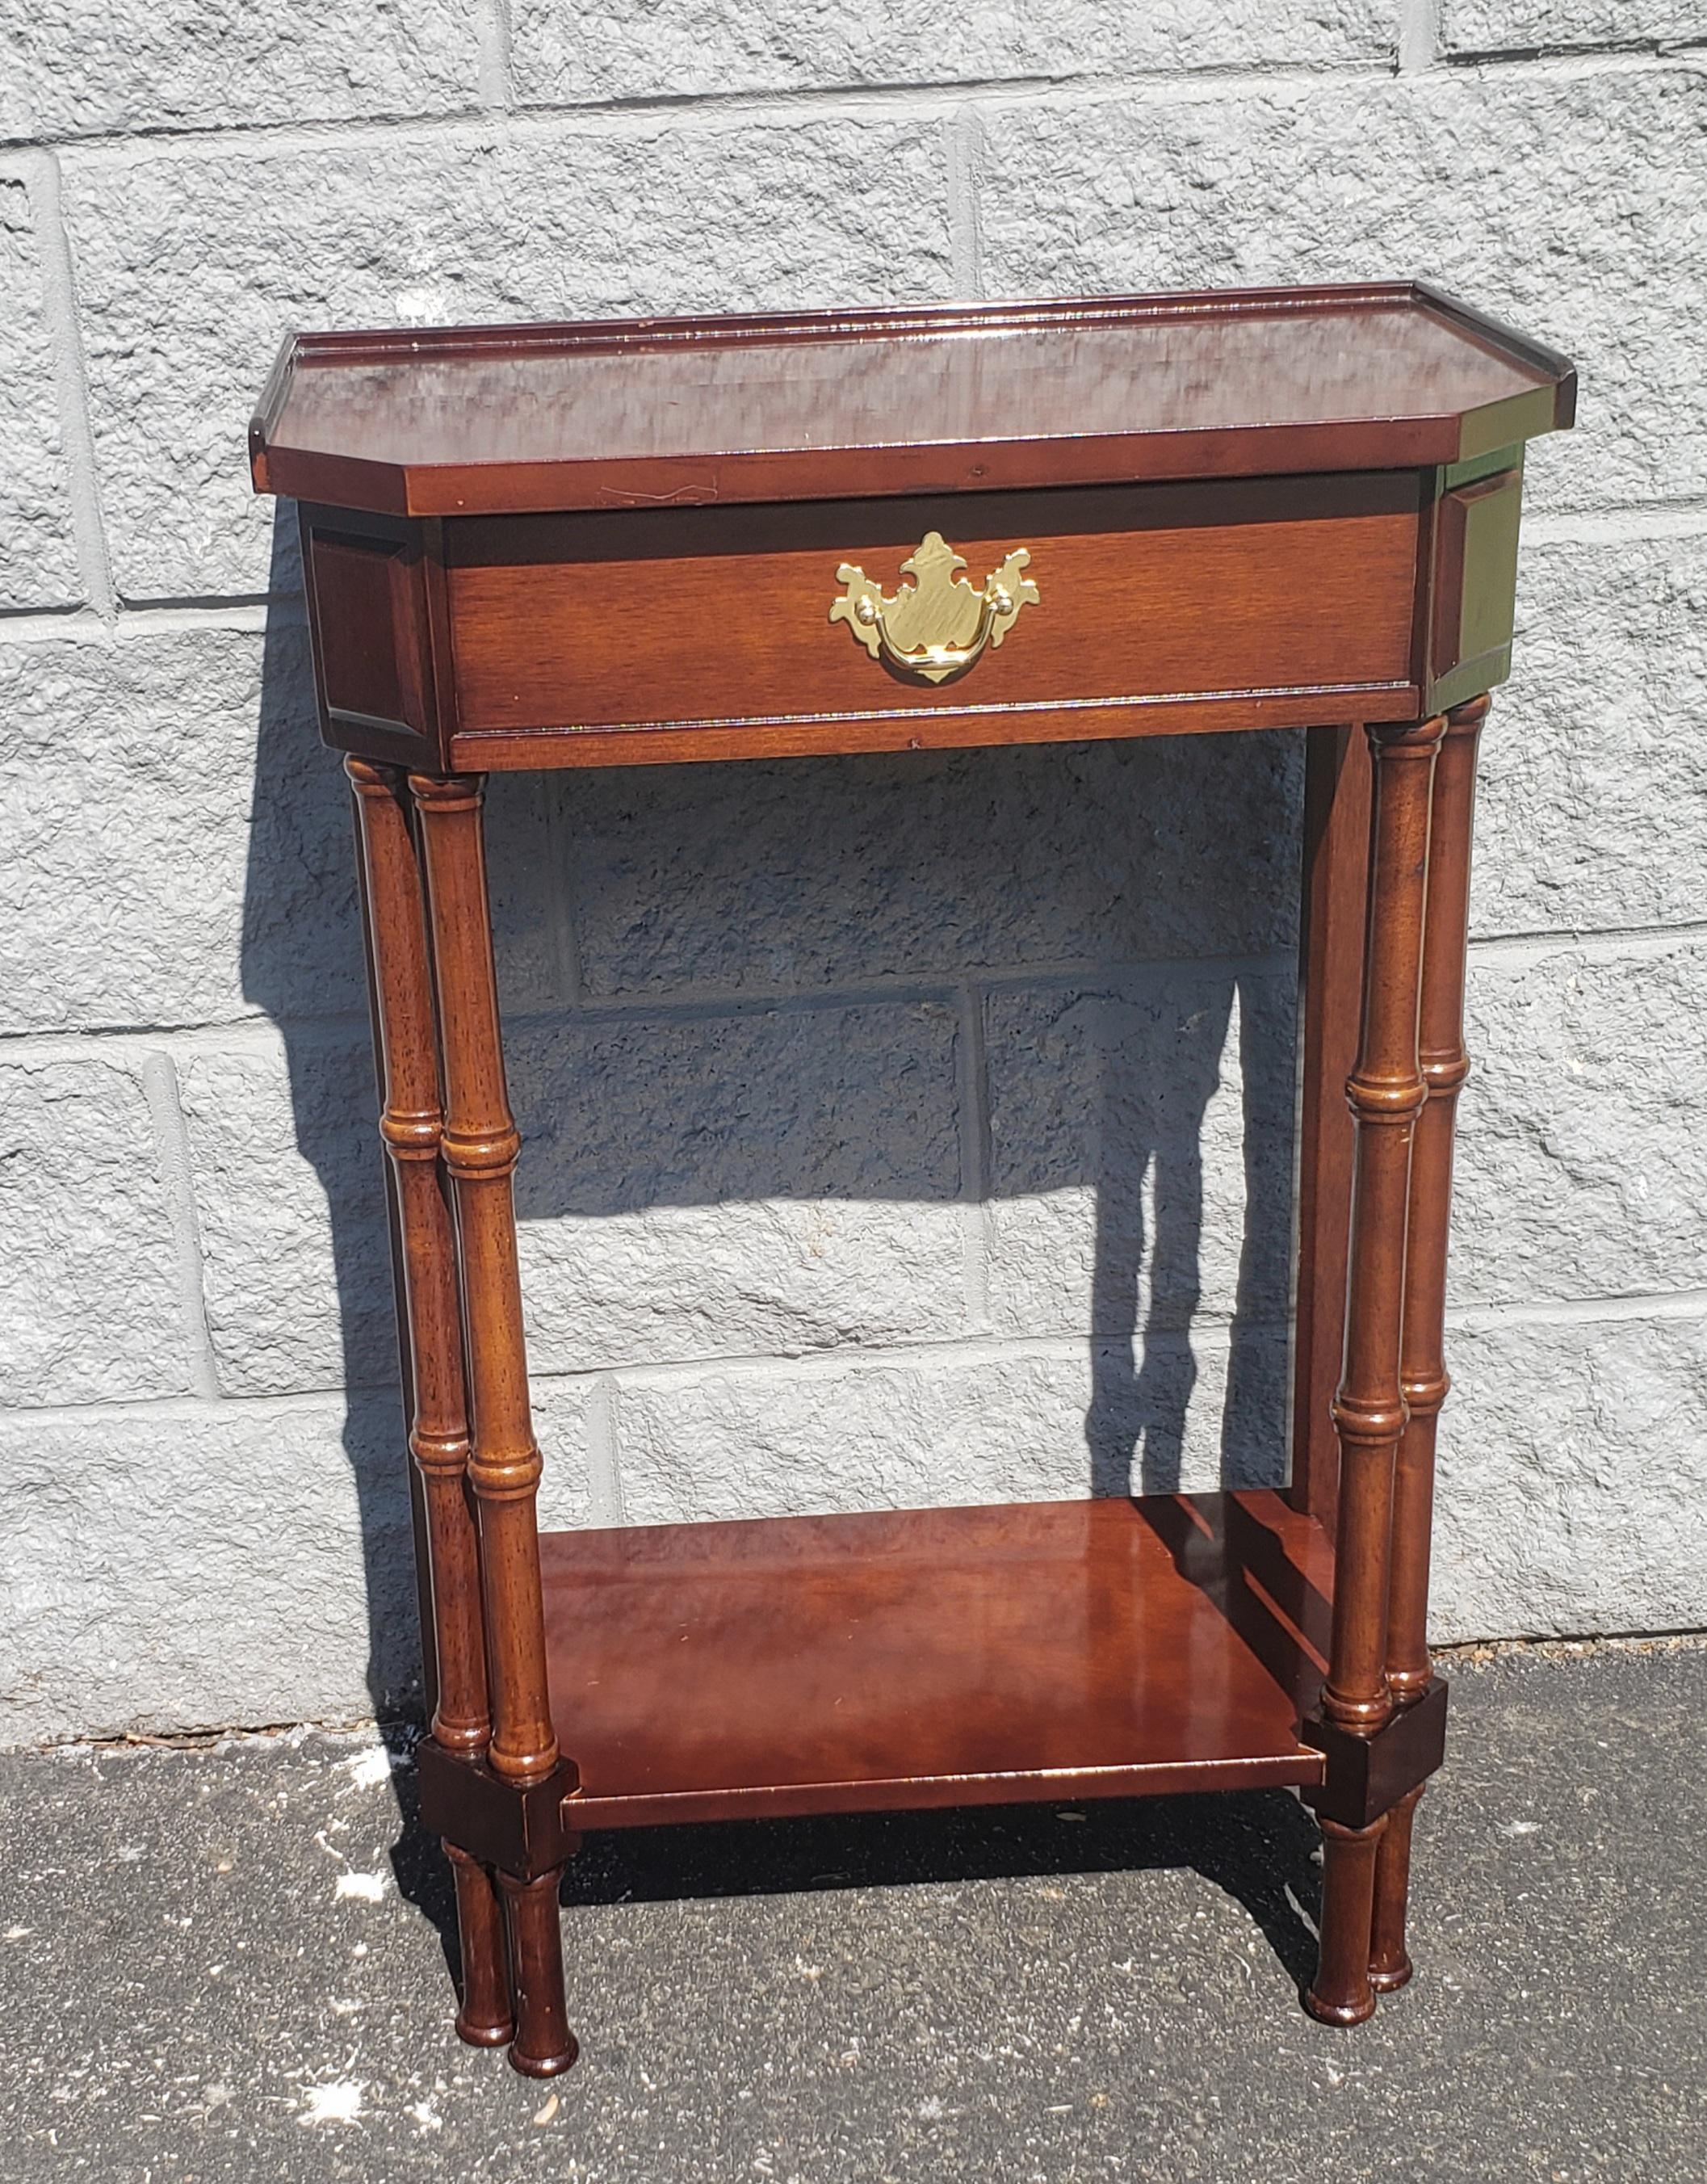 A faux bamboo mahogany single drawer side table in very good vintage condition. Measures 19.5